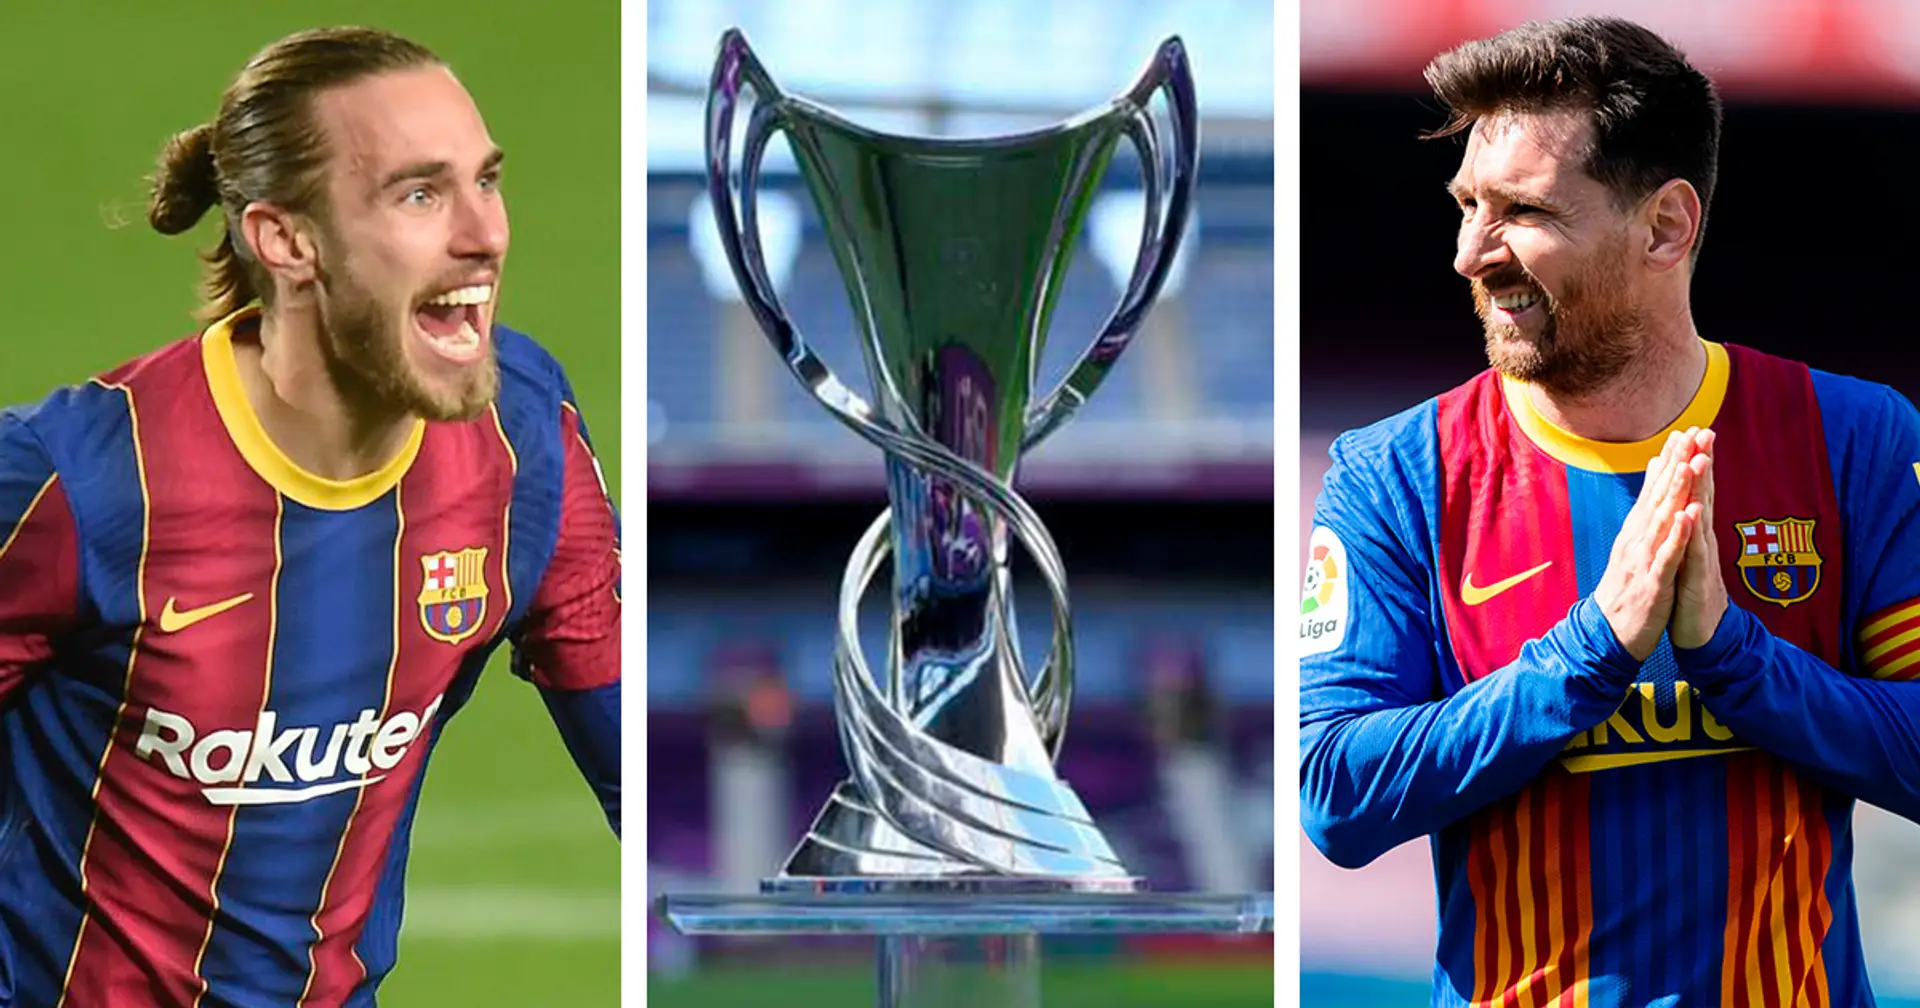 Barcelona will play 3 big games on Sunday: explained